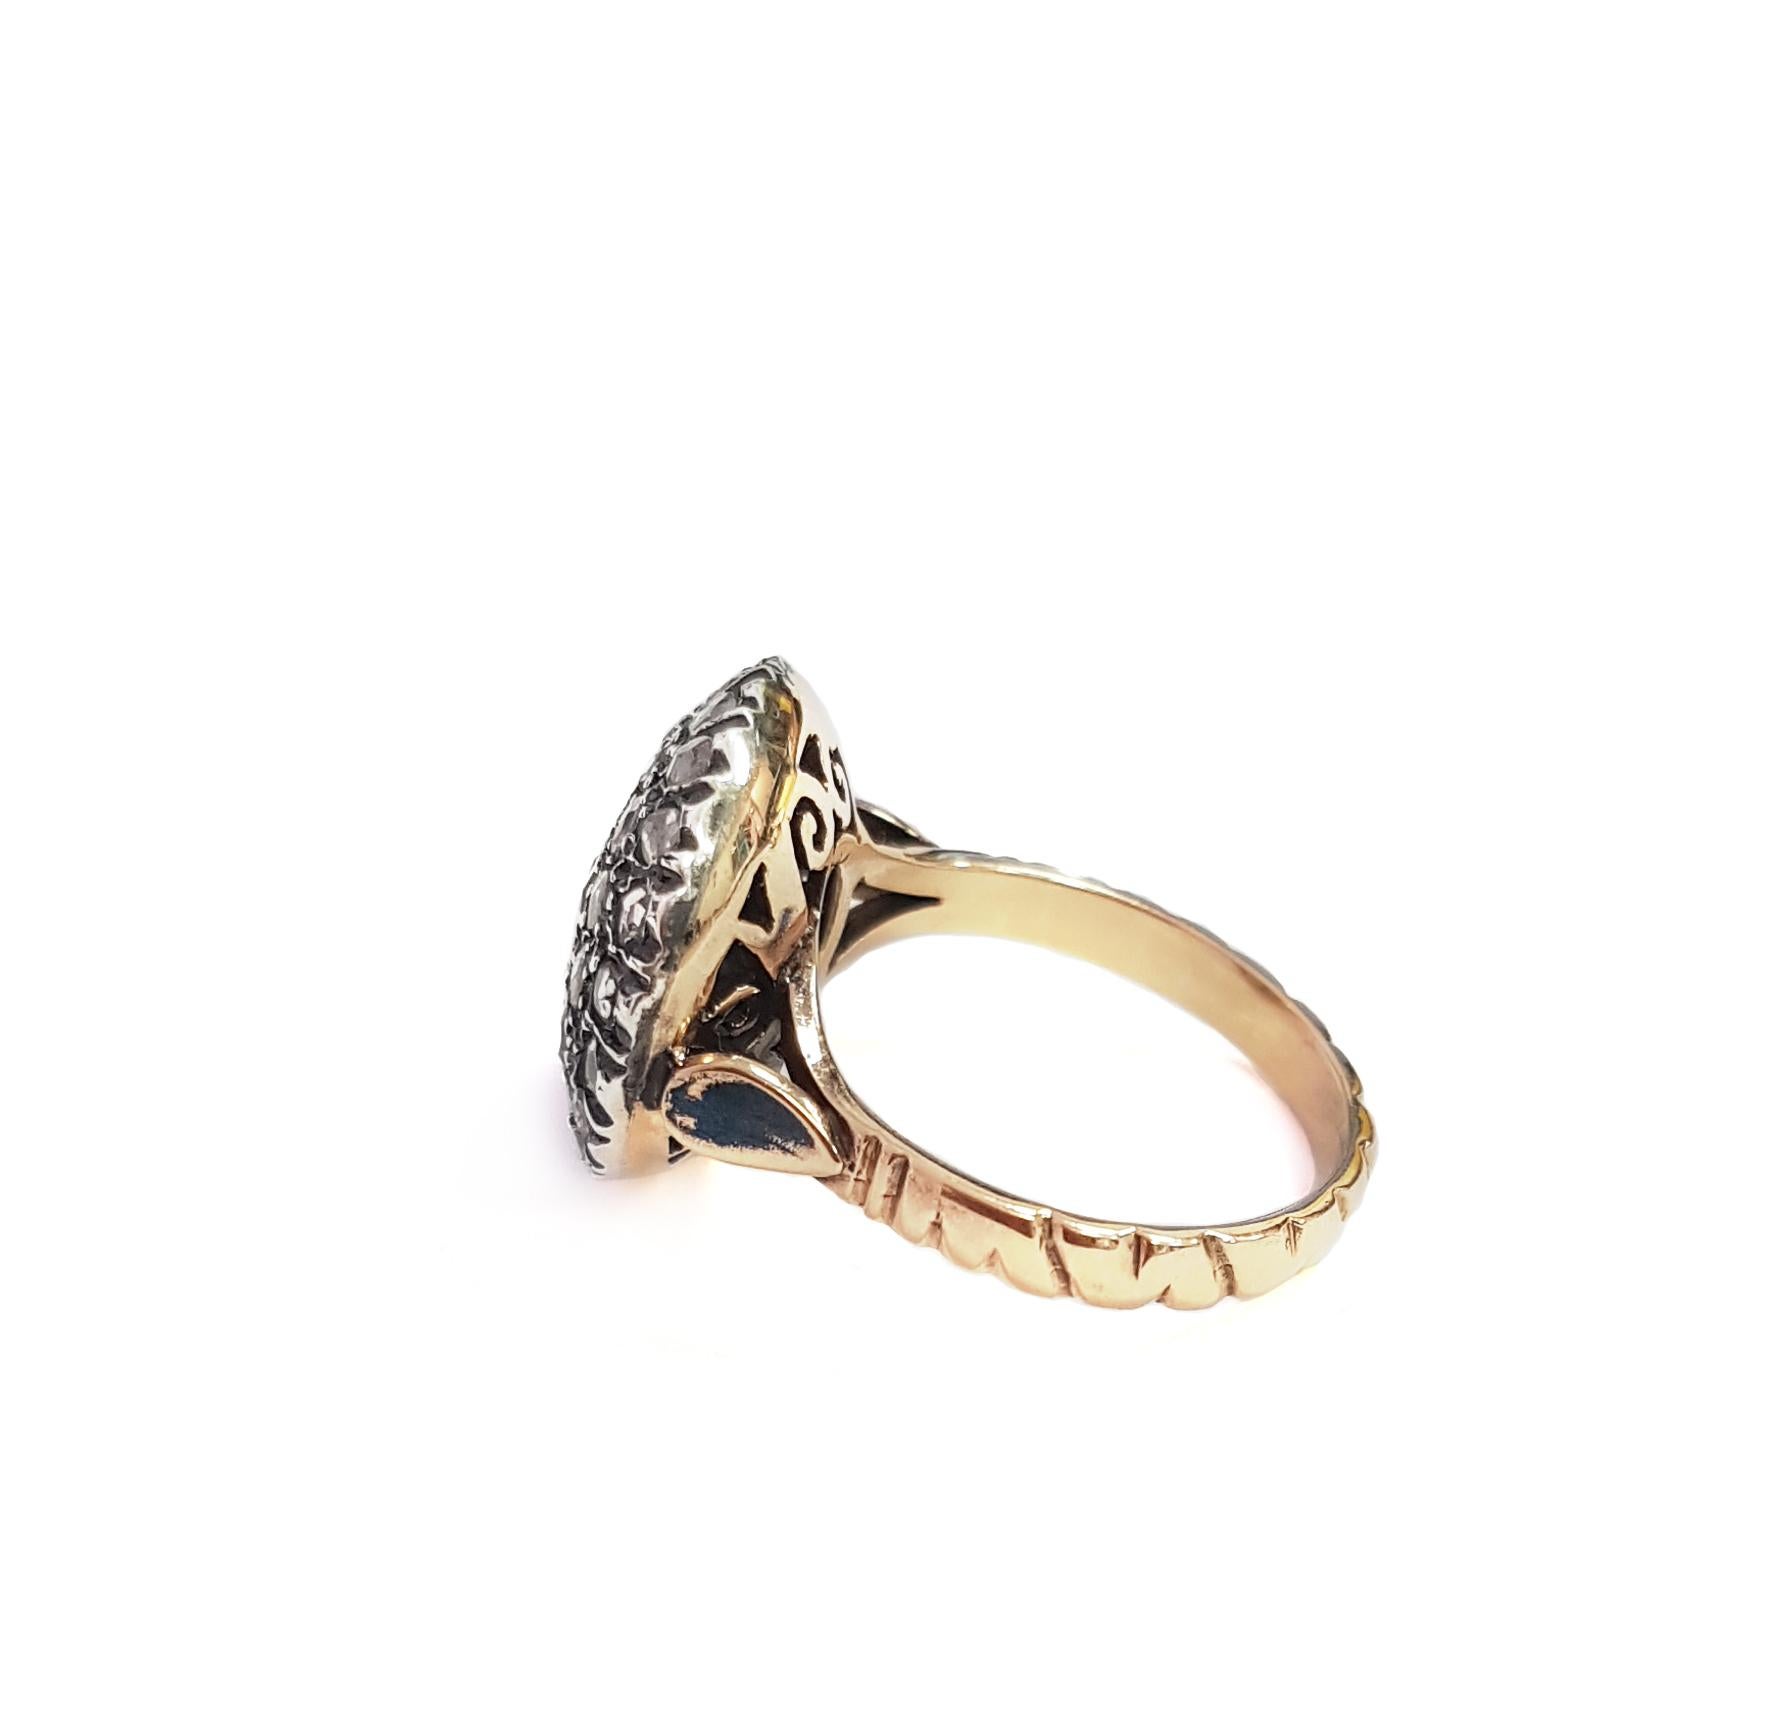 Contemporary 21st Century 9 Karat Rose Gold and Diamond Round Cesellato Cocktail Ring For Sale